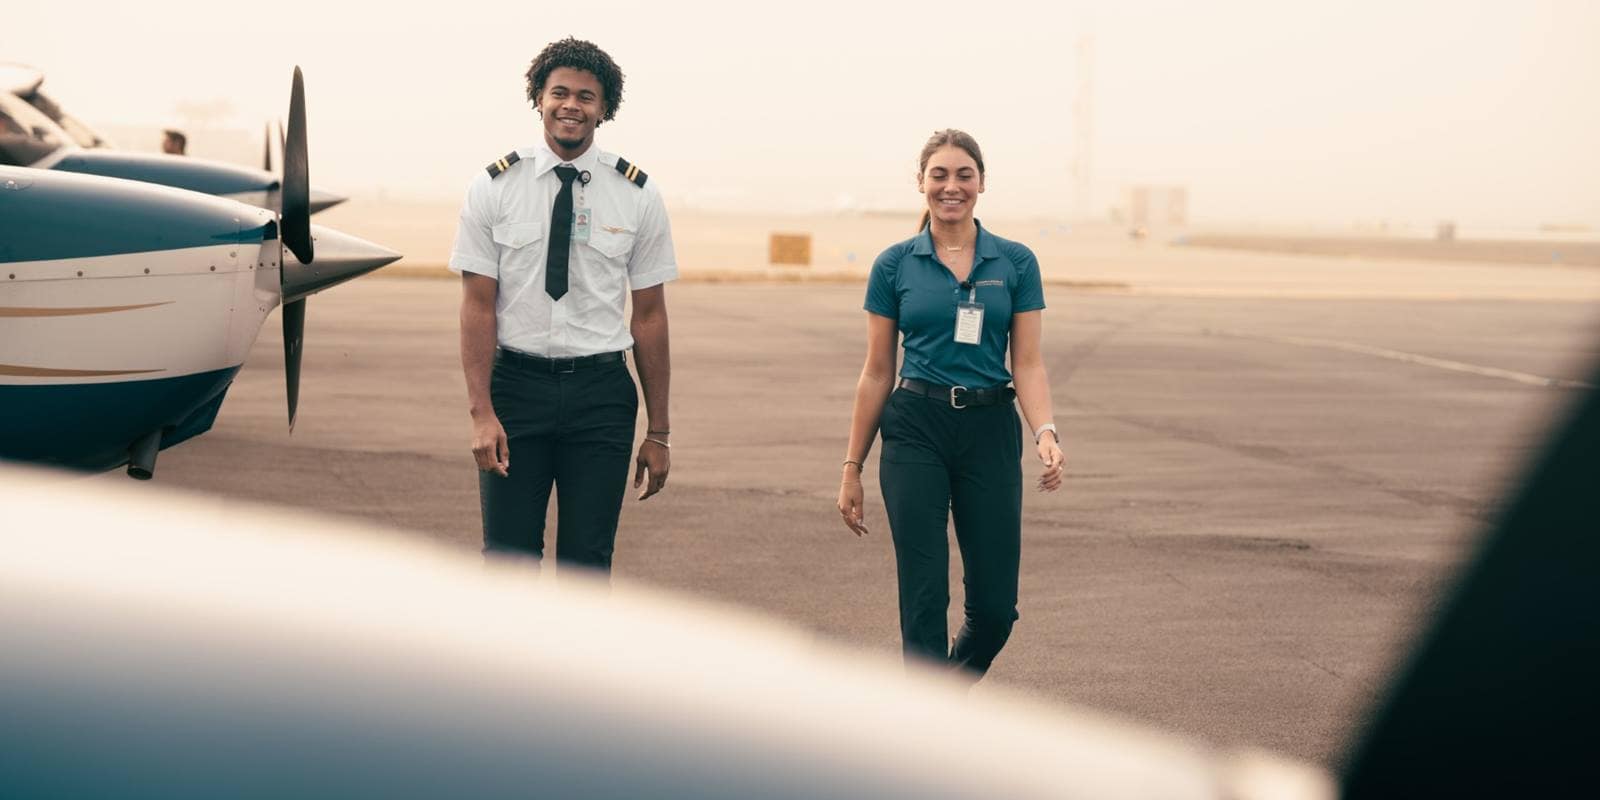 Embry-Riddle’s Aeronautical Science bachelor degree programs (Fixed and Rotary) offer the most advanced flight training curriculum in the world for pilots.